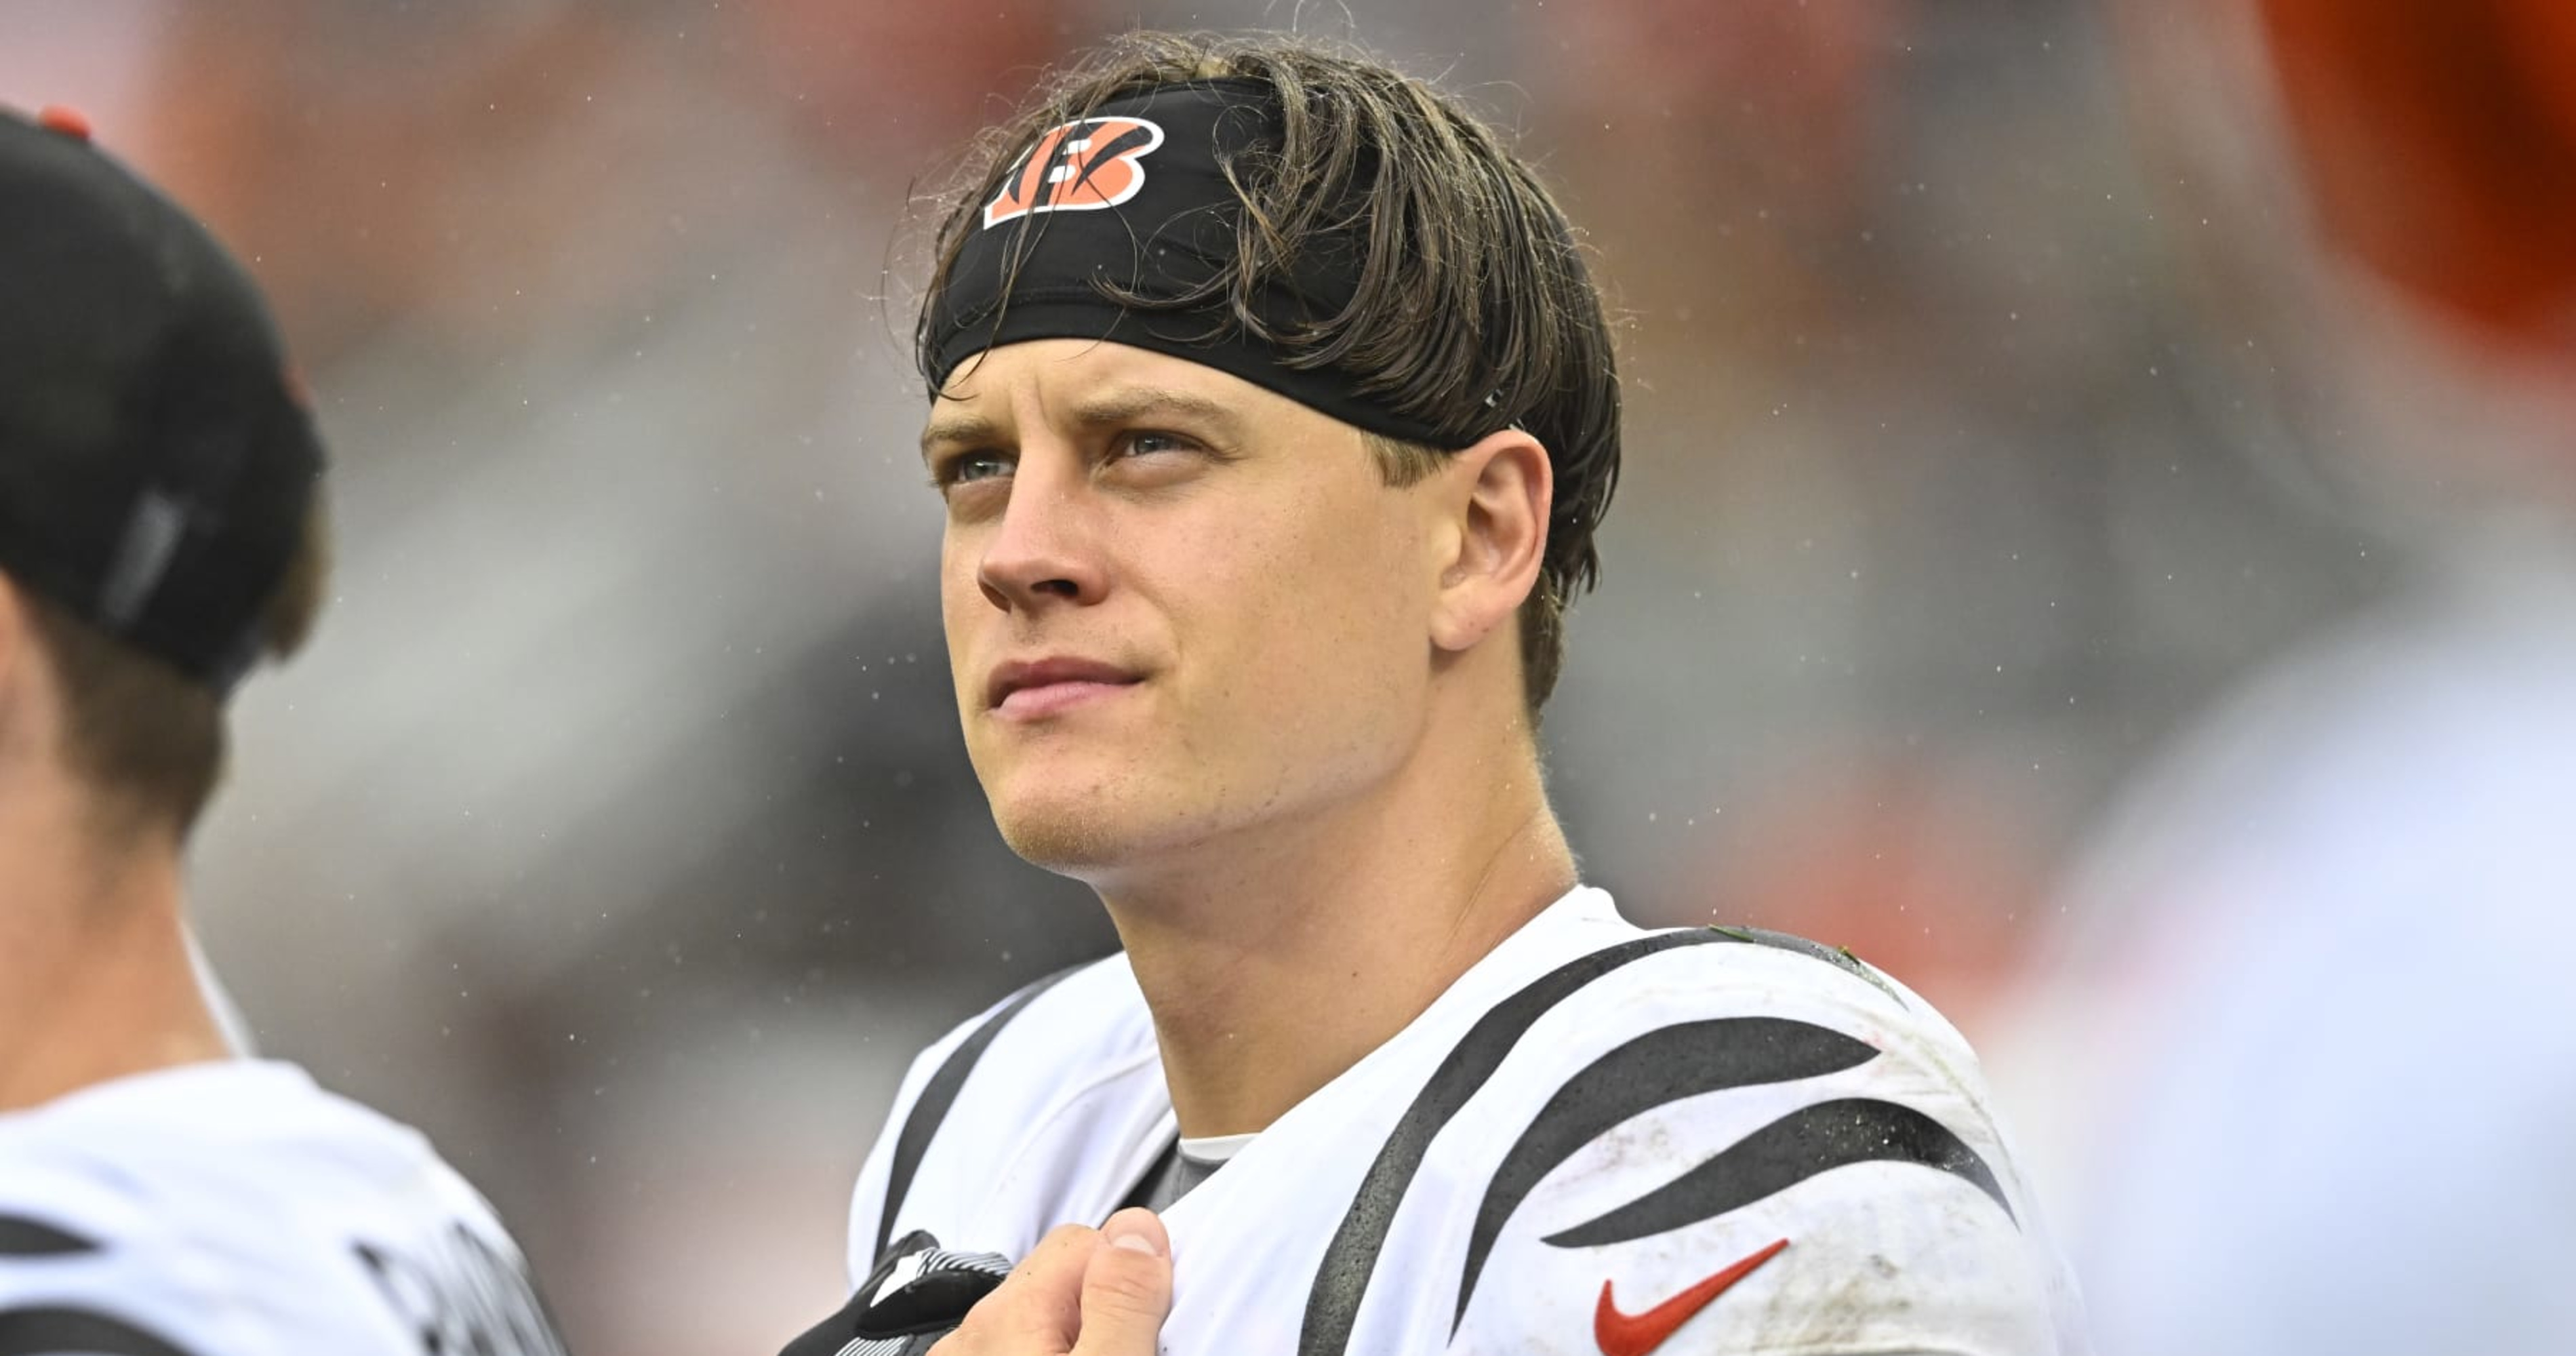 Bengals' Joe Burrow Jokes It Was Time For a Haircut After Blowout